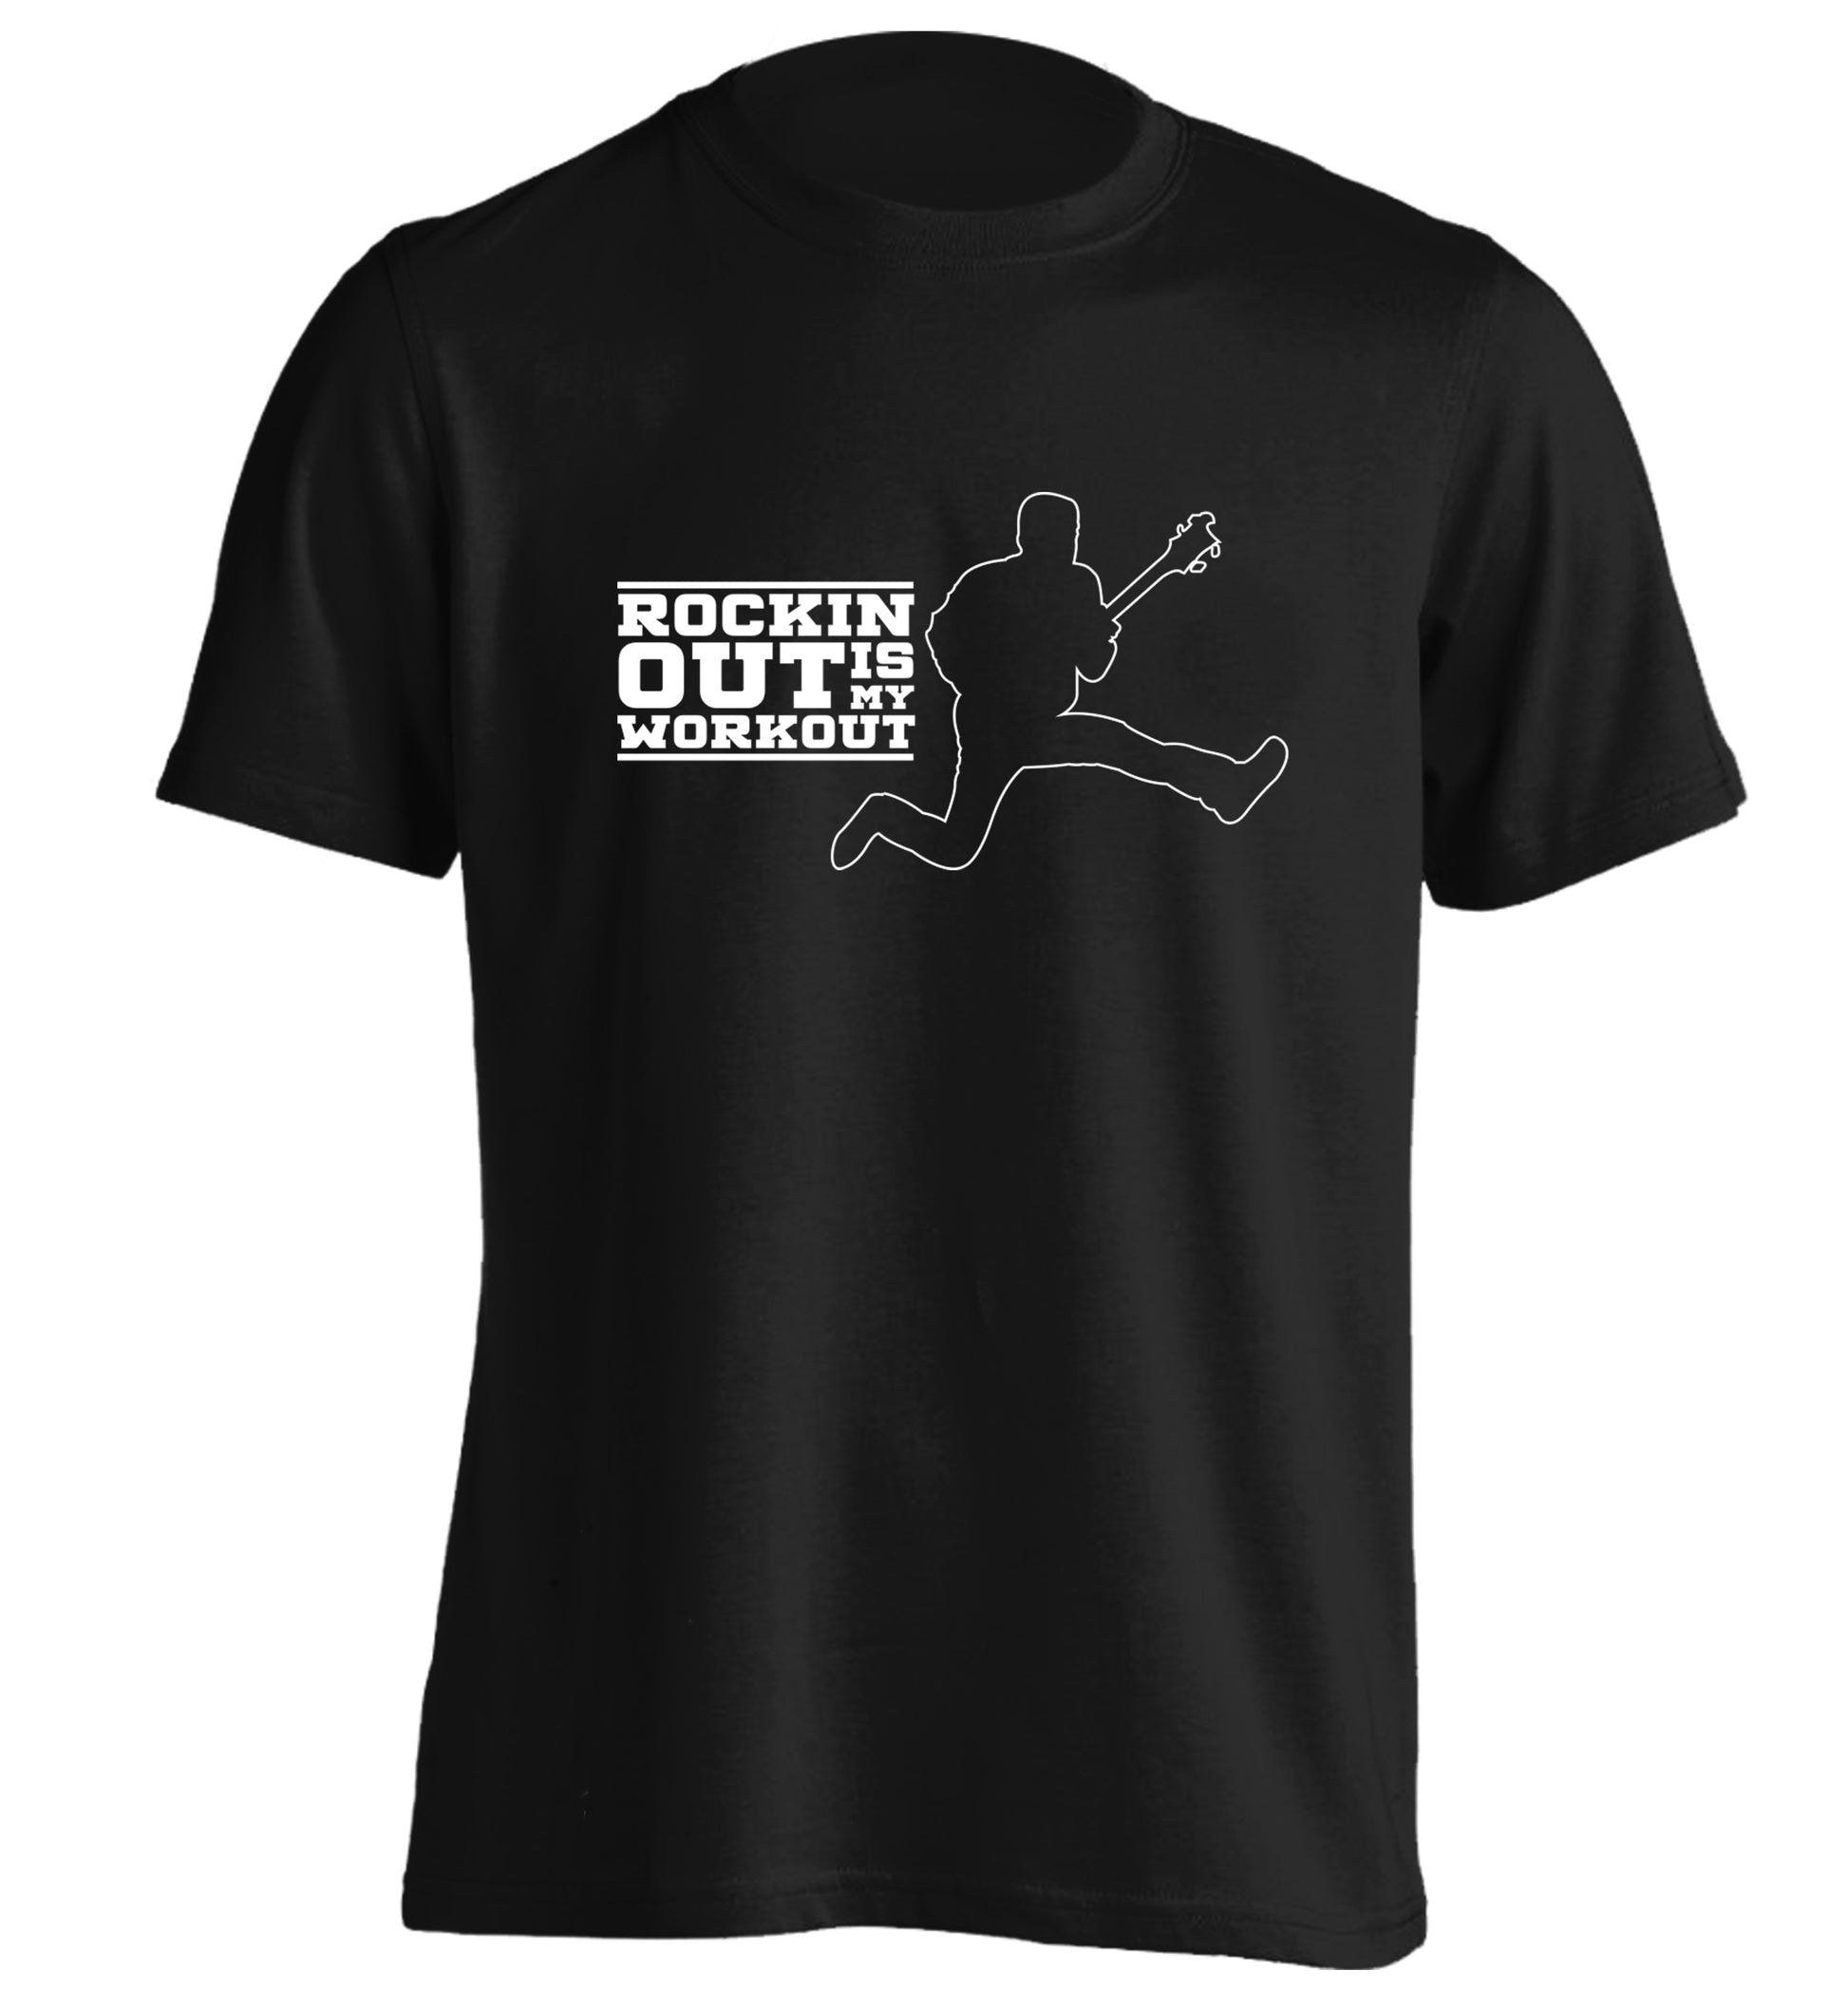 Rockin out is my workout adults unisex black Tshirt 2XL